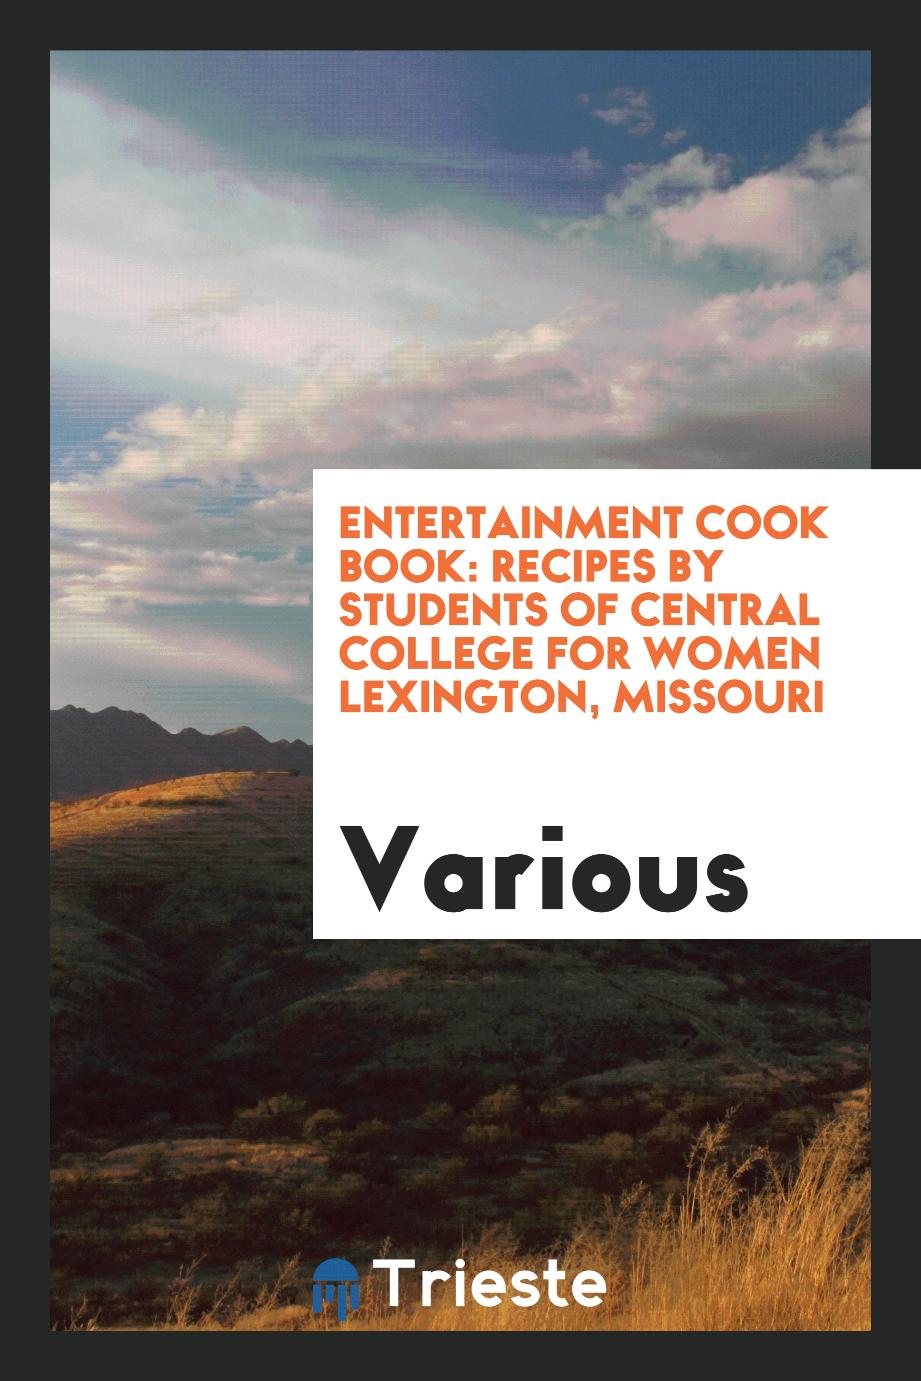 Entertainment Cook Book: Recipes by Students of Central College for Women Lexington, Missouri